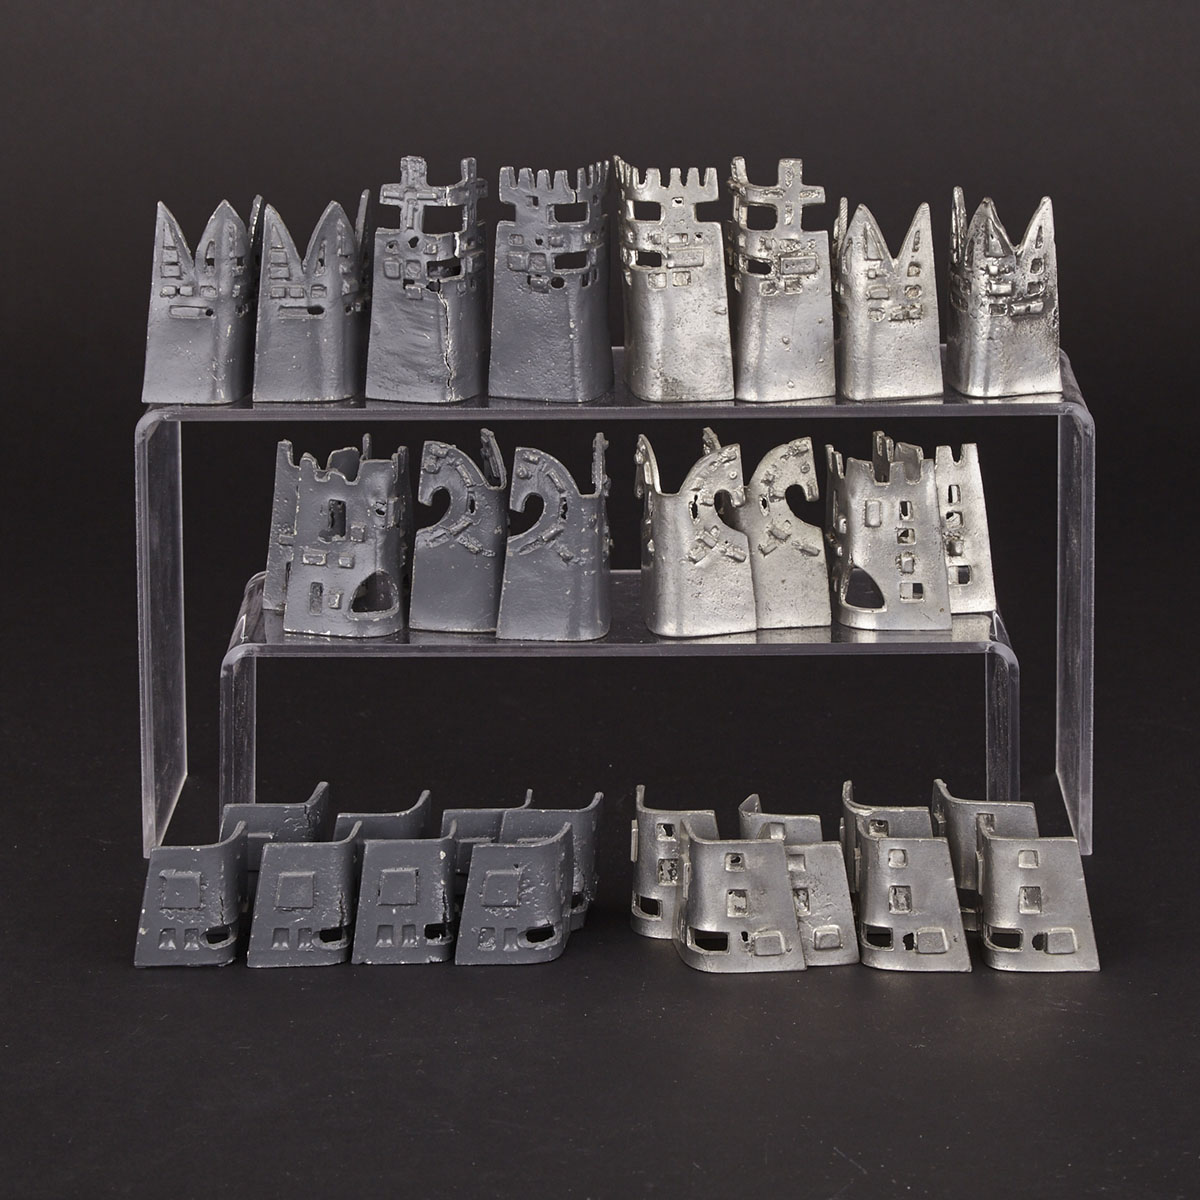 Brazilian Cast and Wrought Aluminum Building Form Chess Set, mid 20th century